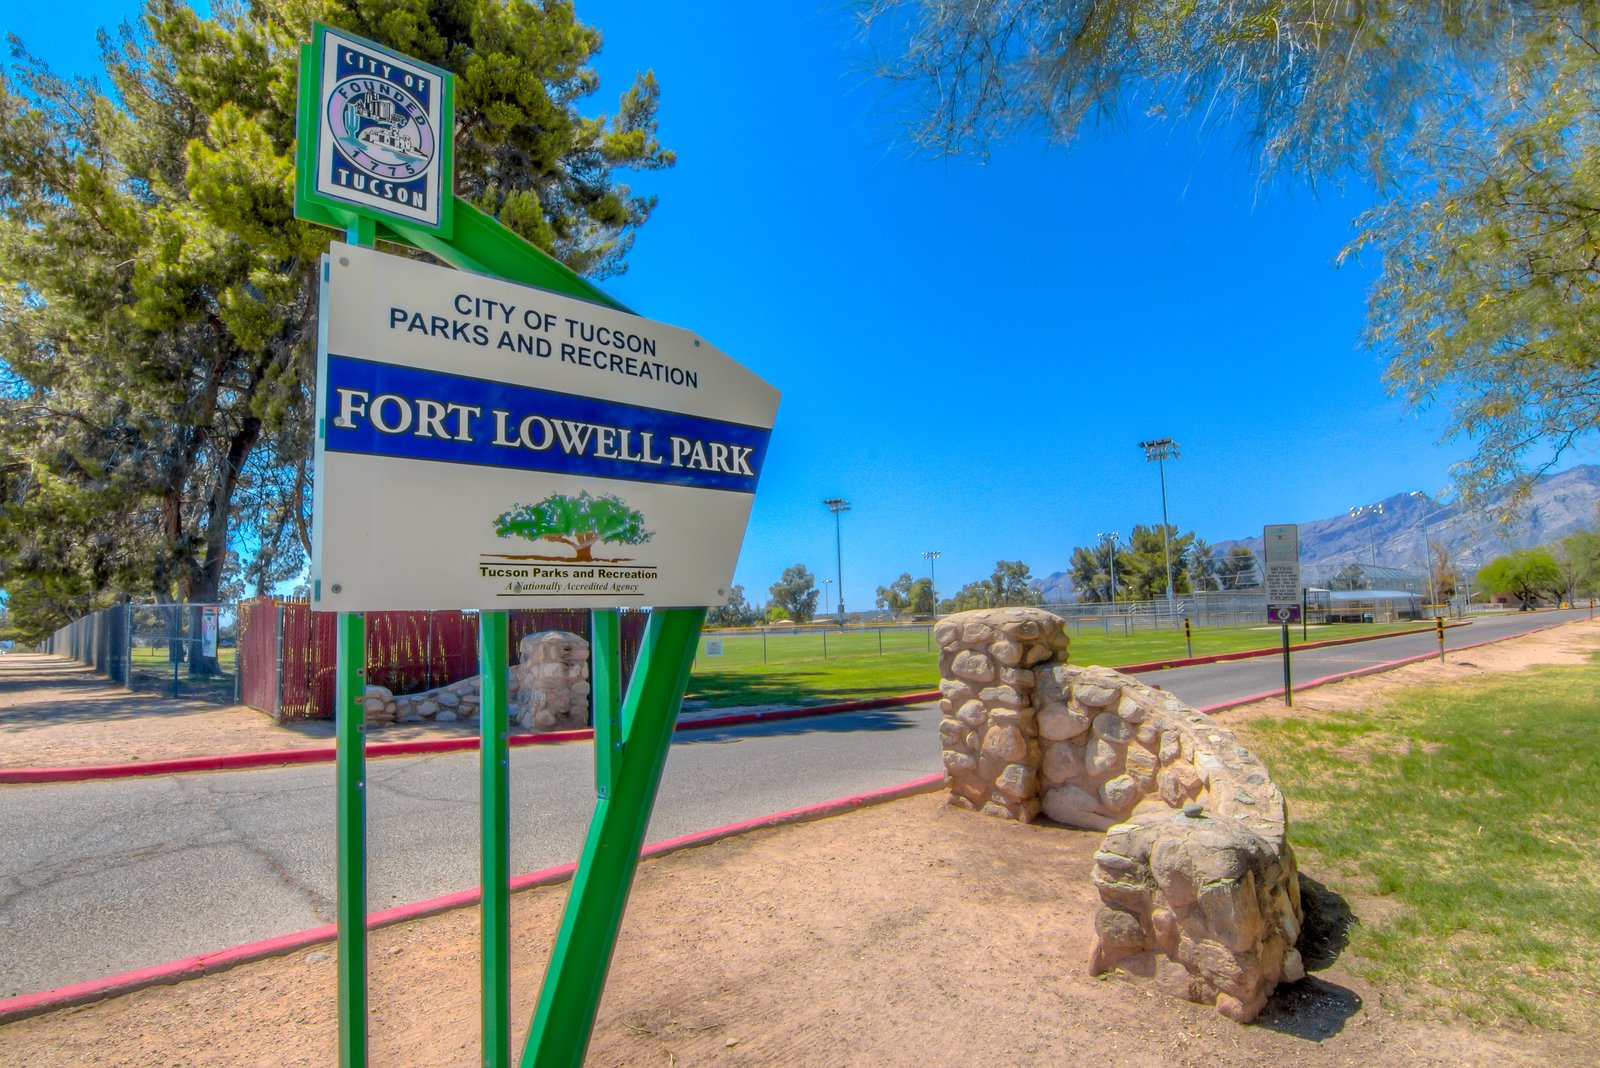 41 Fort Lowell Park photo a.jpg